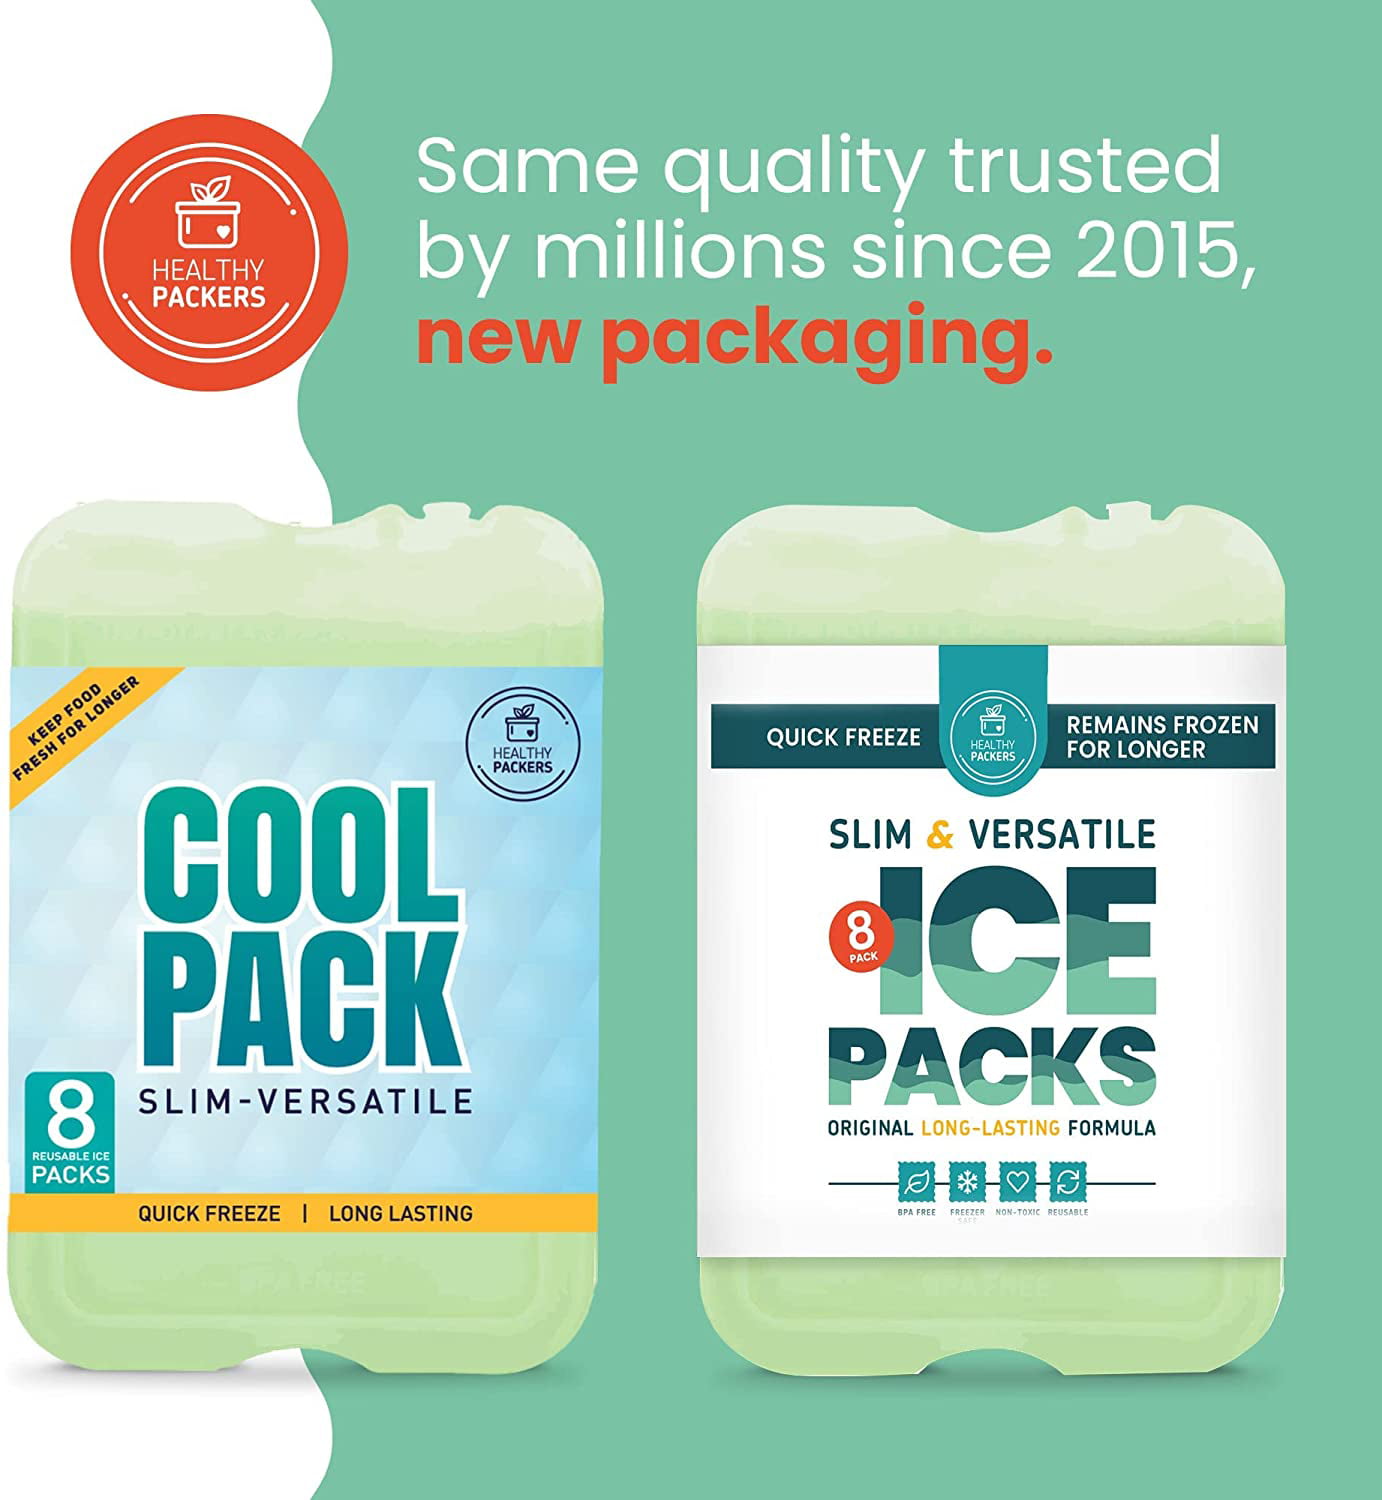 Healthy Packers Kids' Ice Packs - Long-Lasting Reusable Slim Packs for  Lunch Boxes, Bags, Coolers. Freezer Packs - Multicolor 4-Pack (Penguin